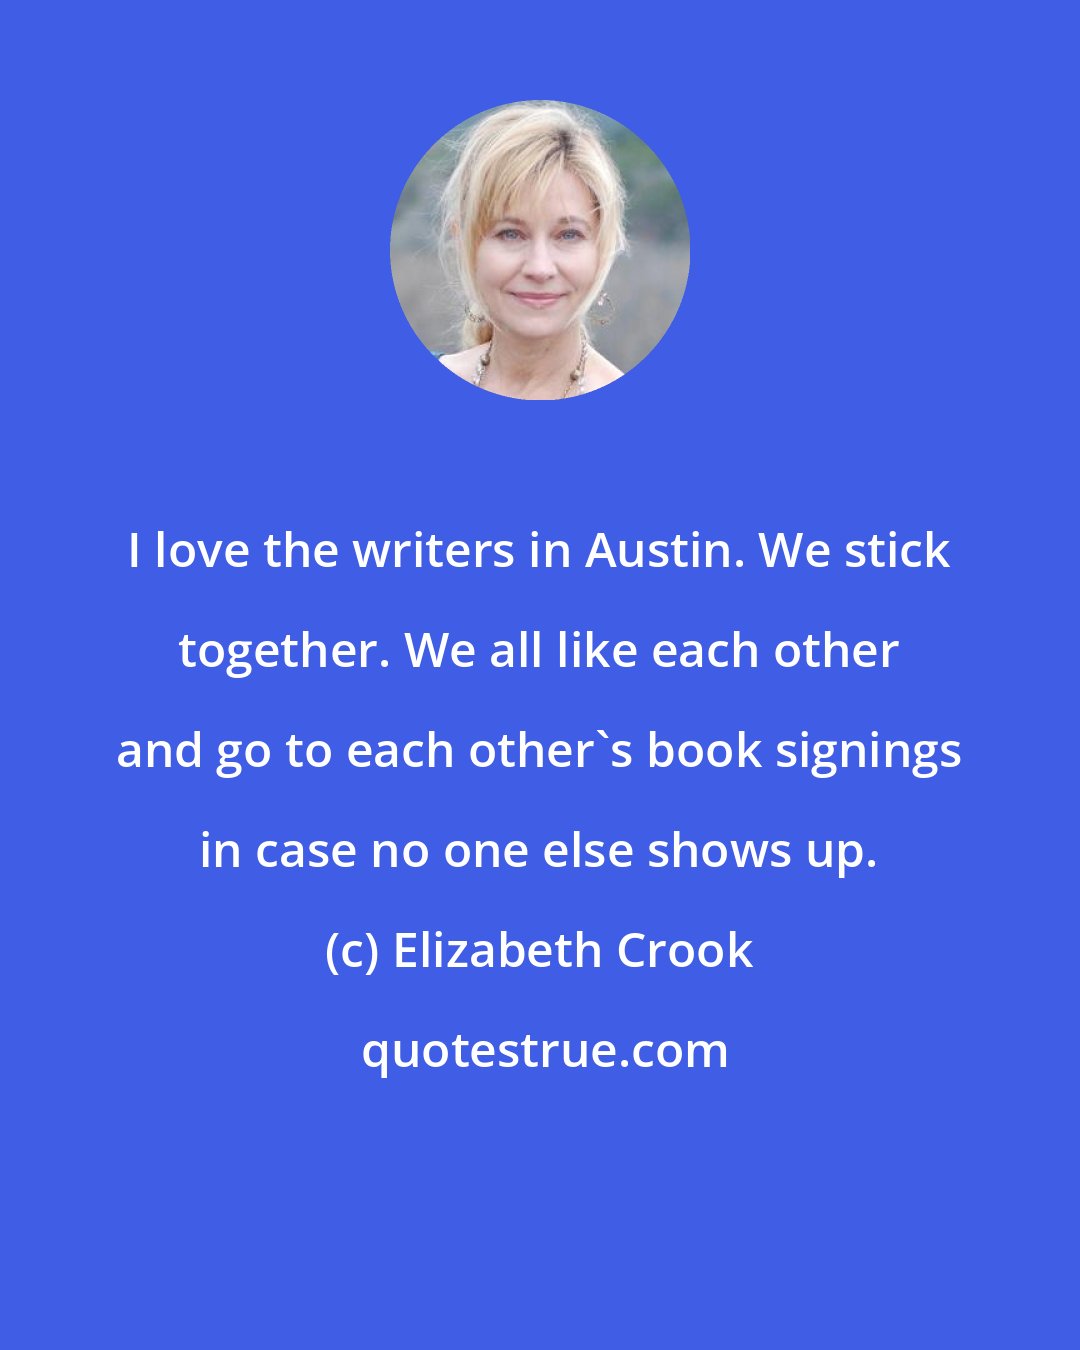 Elizabeth Crook: I love the writers in Austin. We stick together. We all like each other and go to each other's book signings in case no one else shows up.